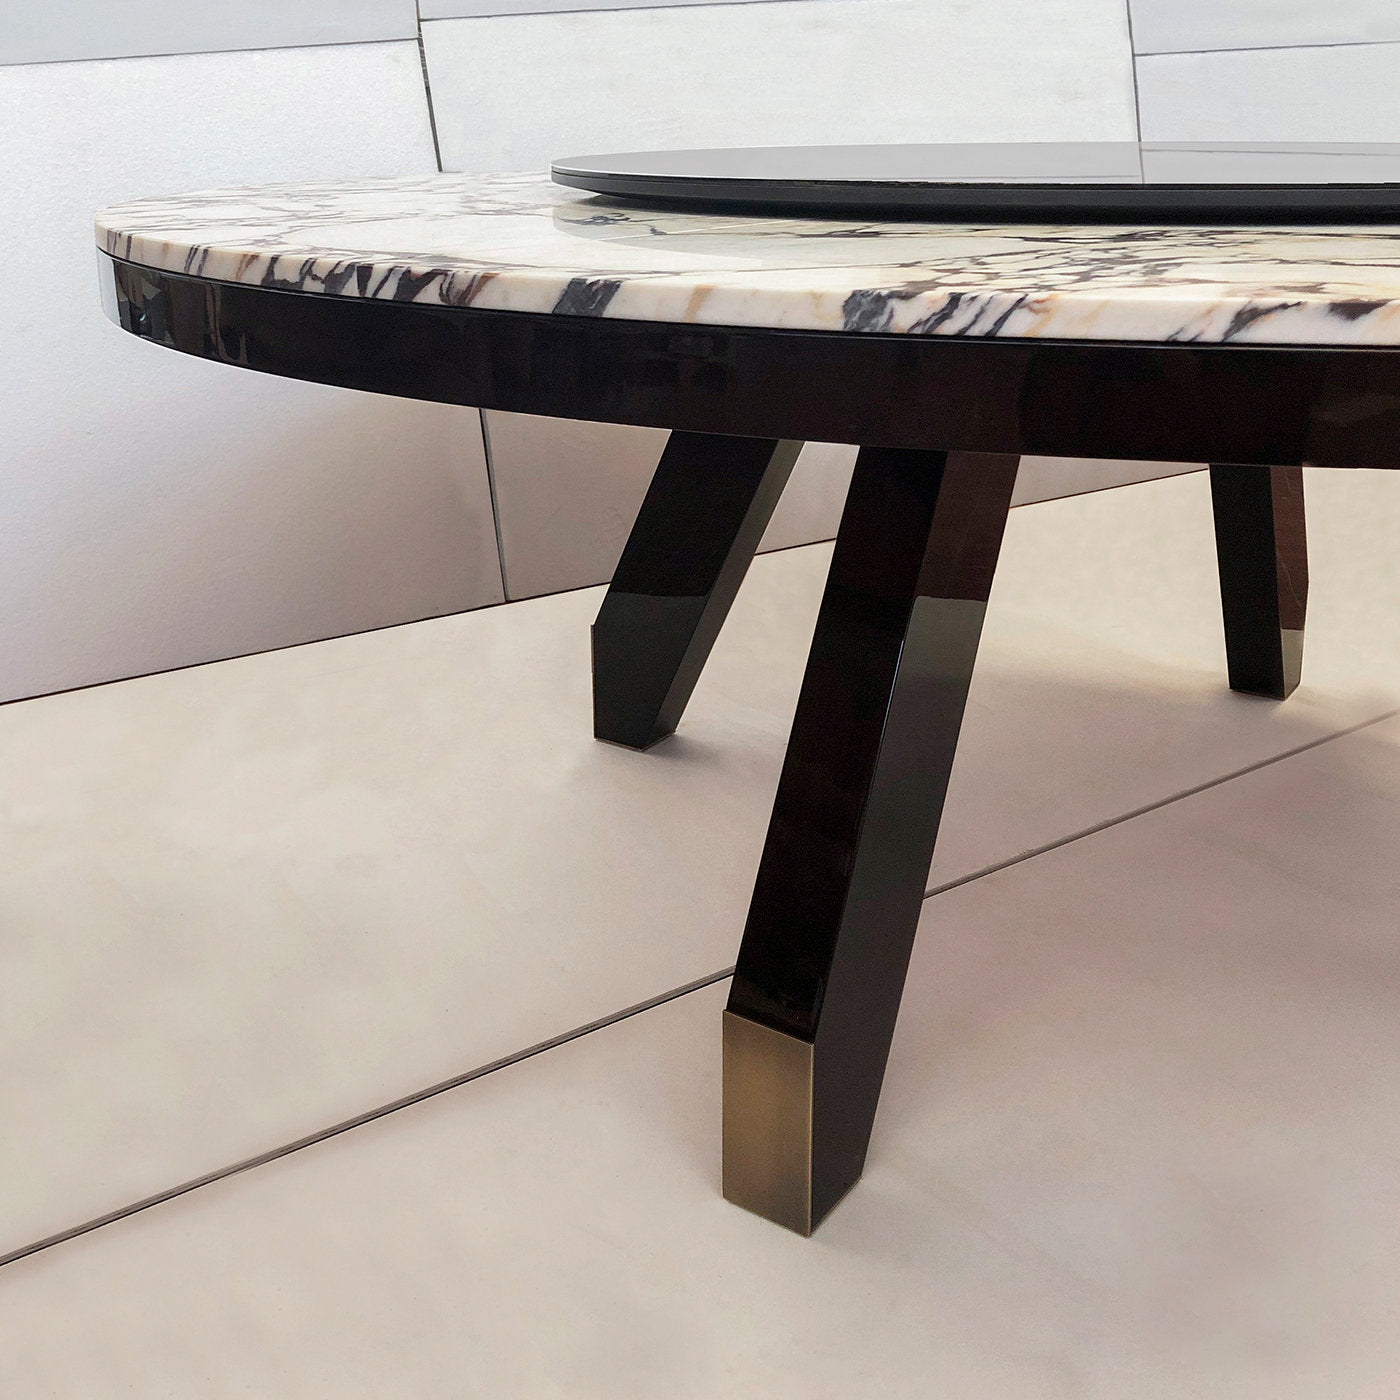 Boscolo Table with Lazy Susan by Bosco Fair - Alternative view 1